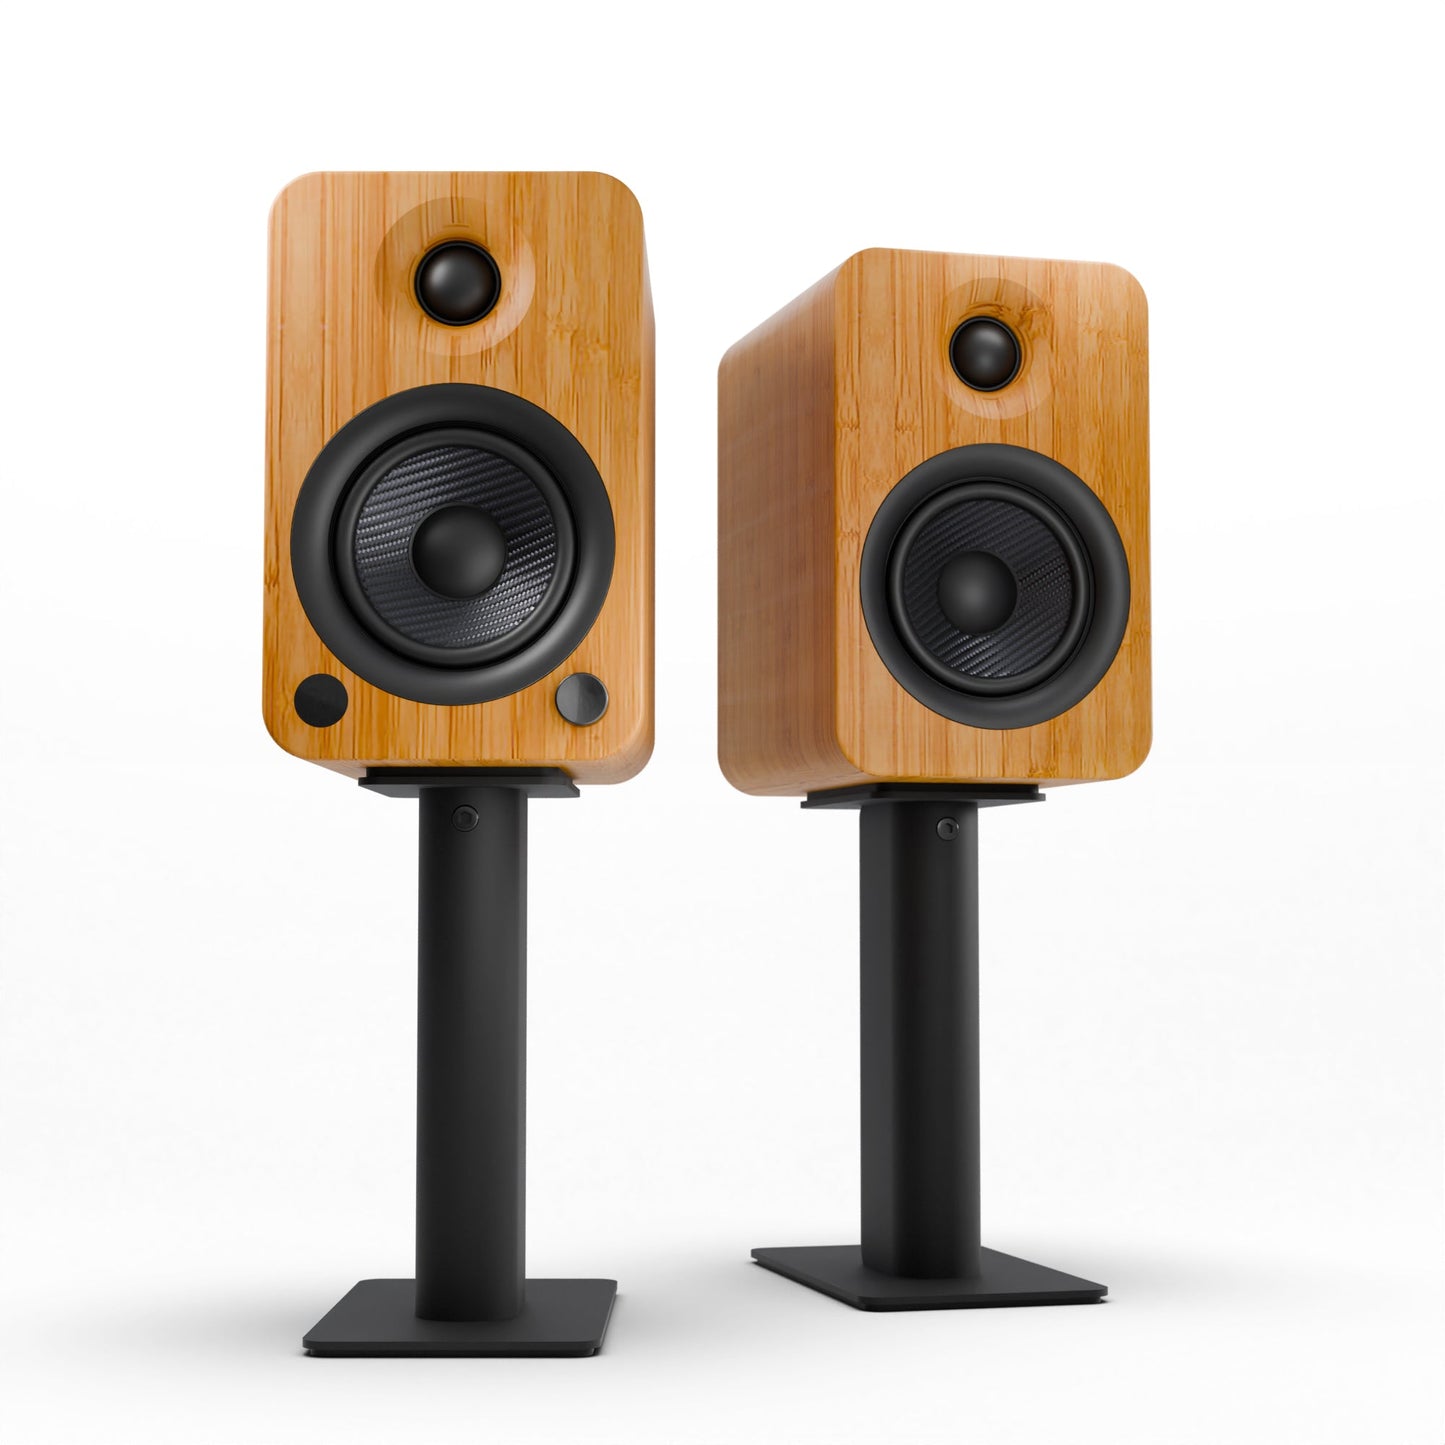 Kanto YU4 140W Powered Bookshelf Speakers with Bluetooth and Phono Preamp - Pair, Bamboo with SP9 Black Stand Bundle KO-YU4BAMBOO-SP9